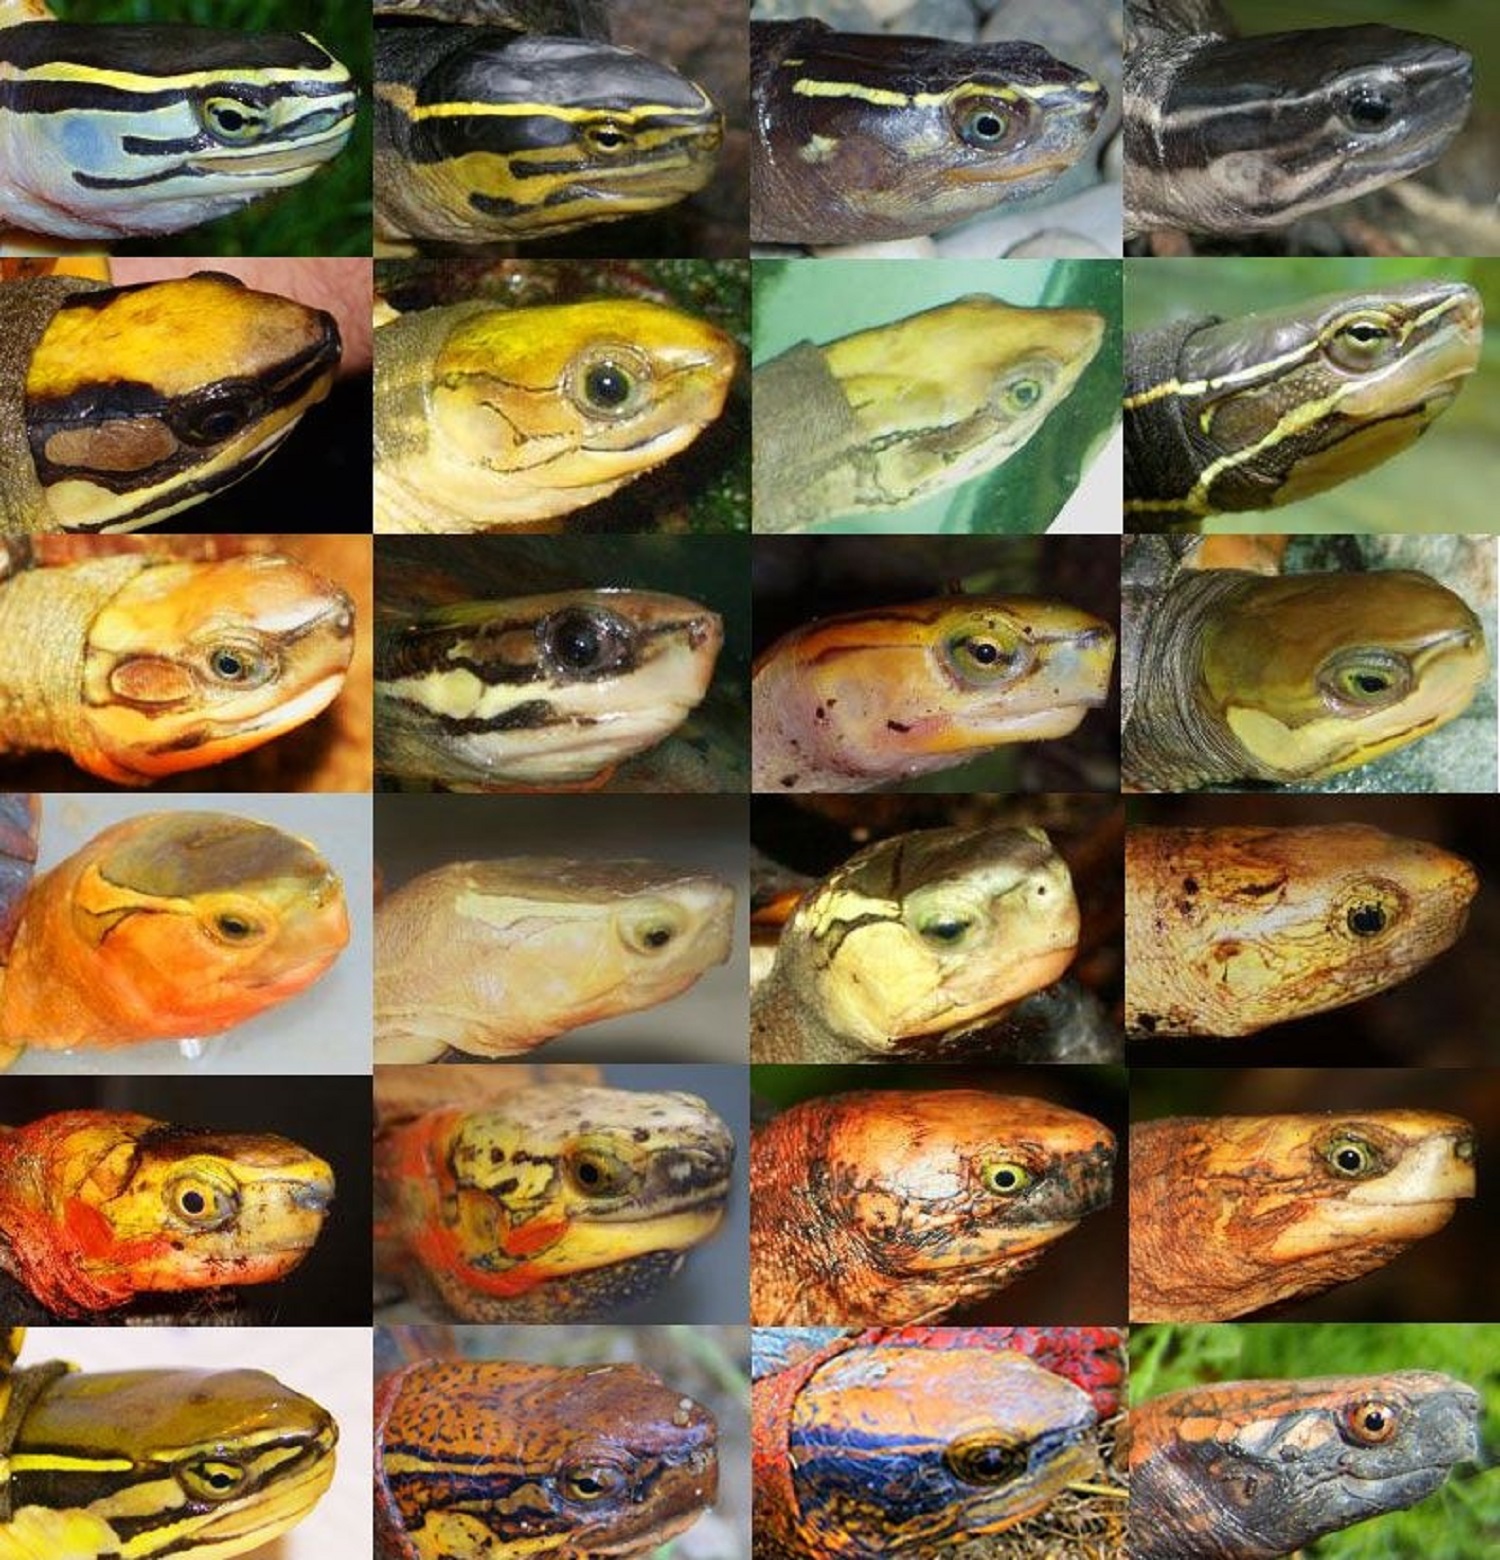 Asian Box Turtle Portraits - Click to learn more